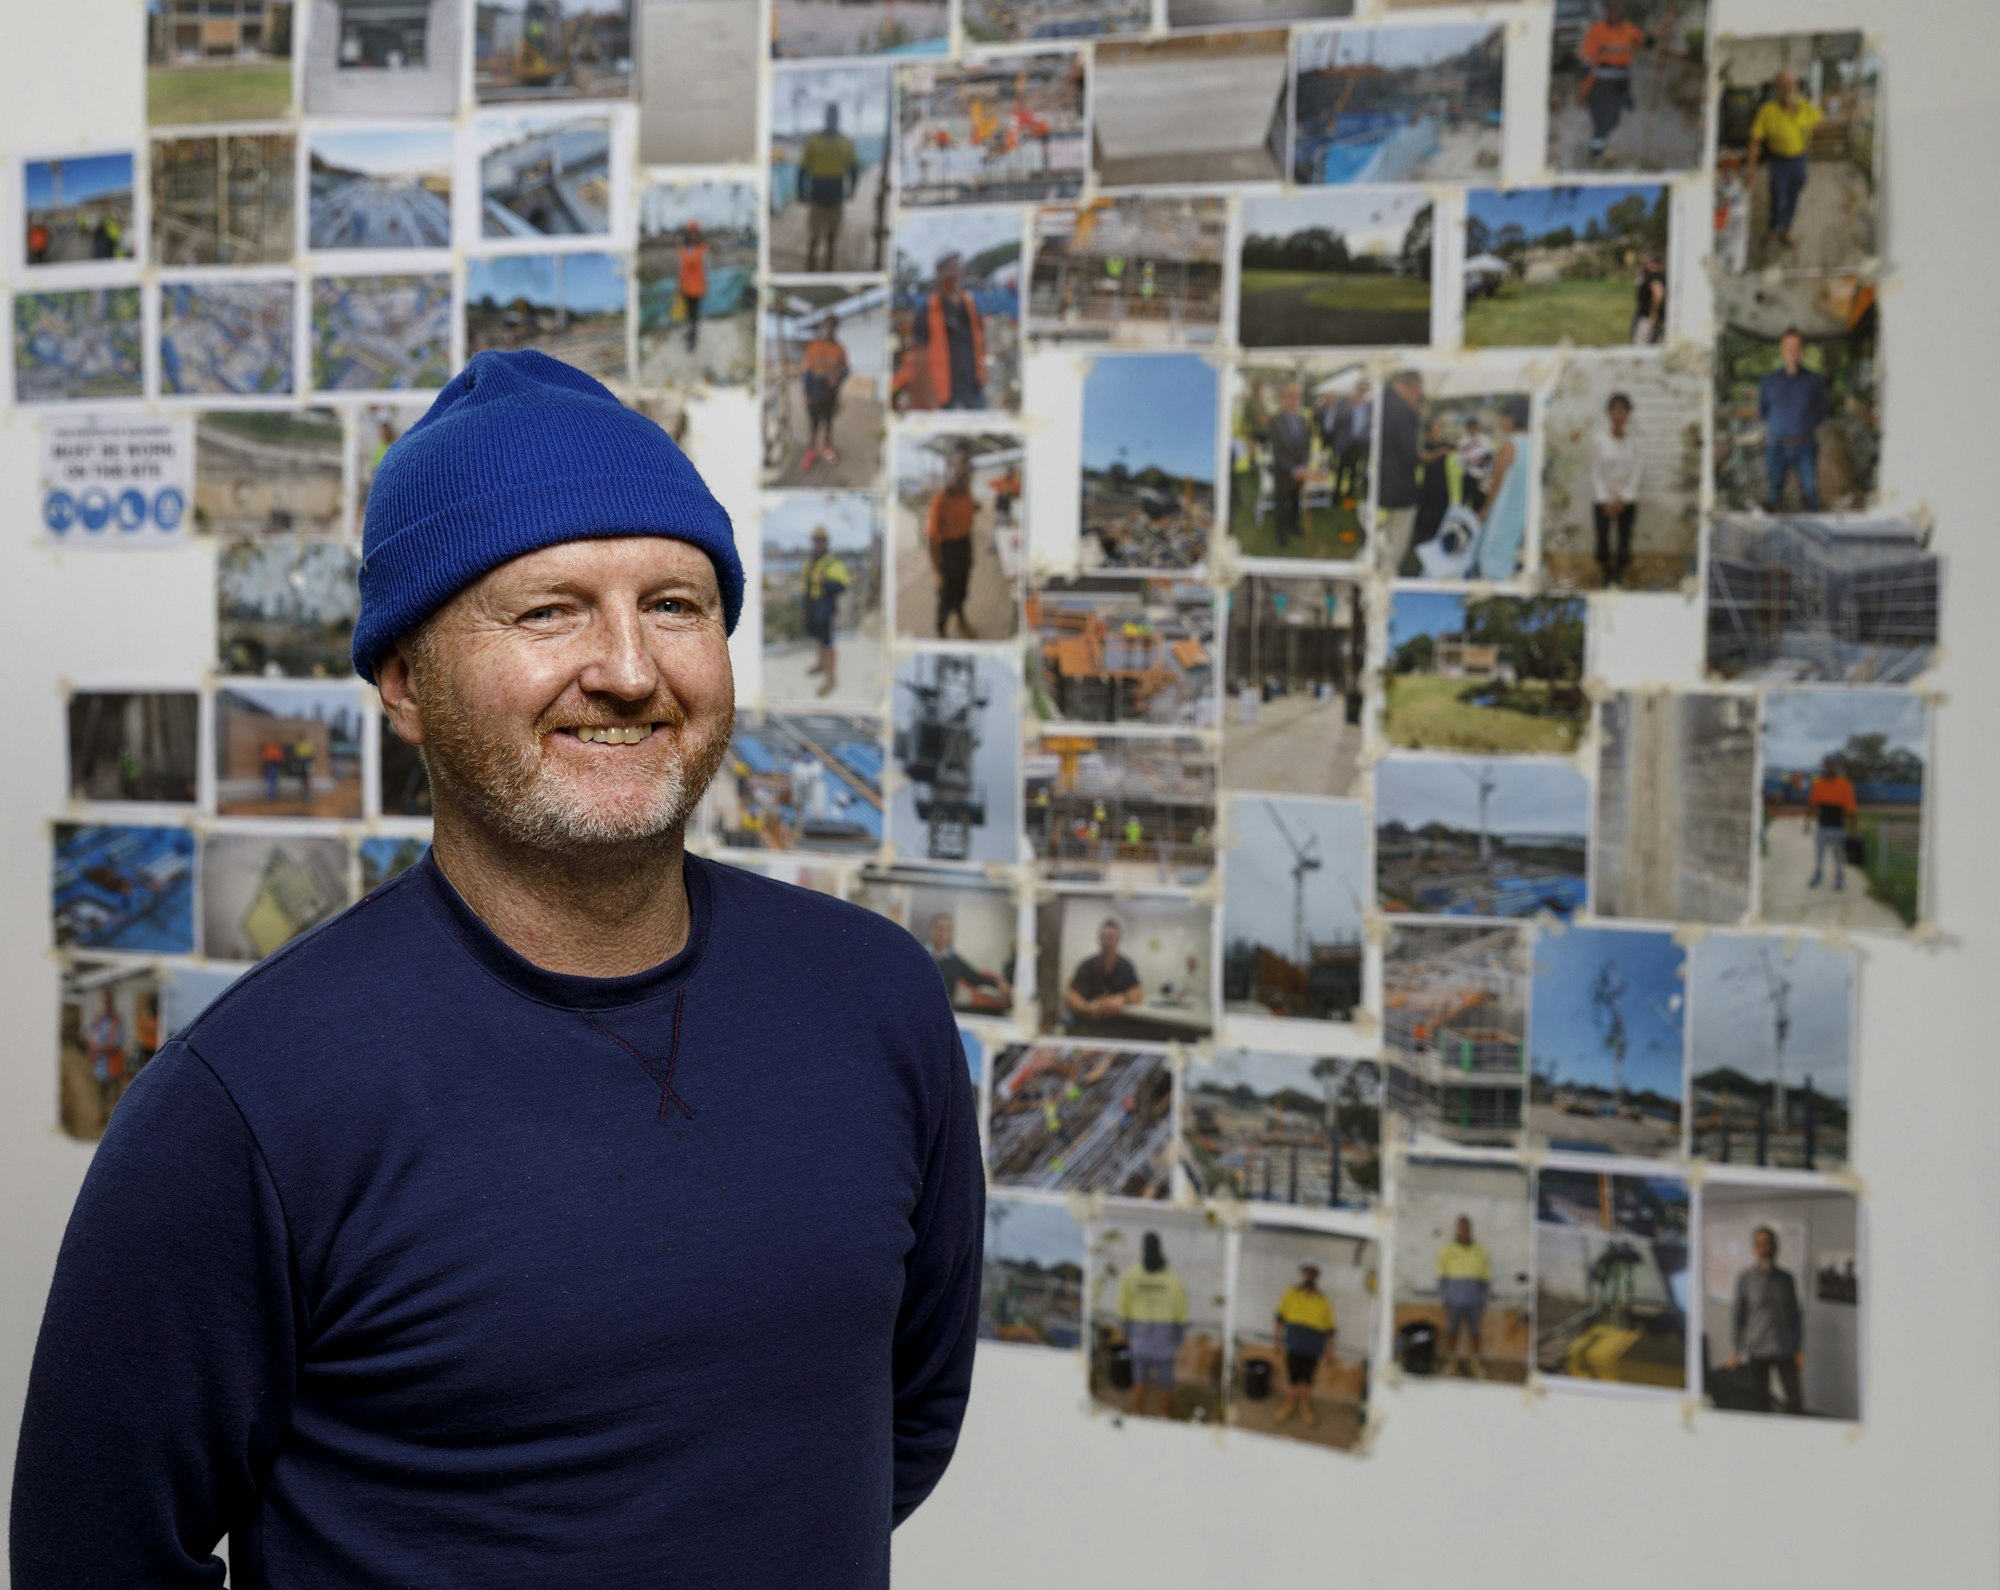 A person wearing a blue beanie stands in front of a wall holding a multitude of unframed photos.